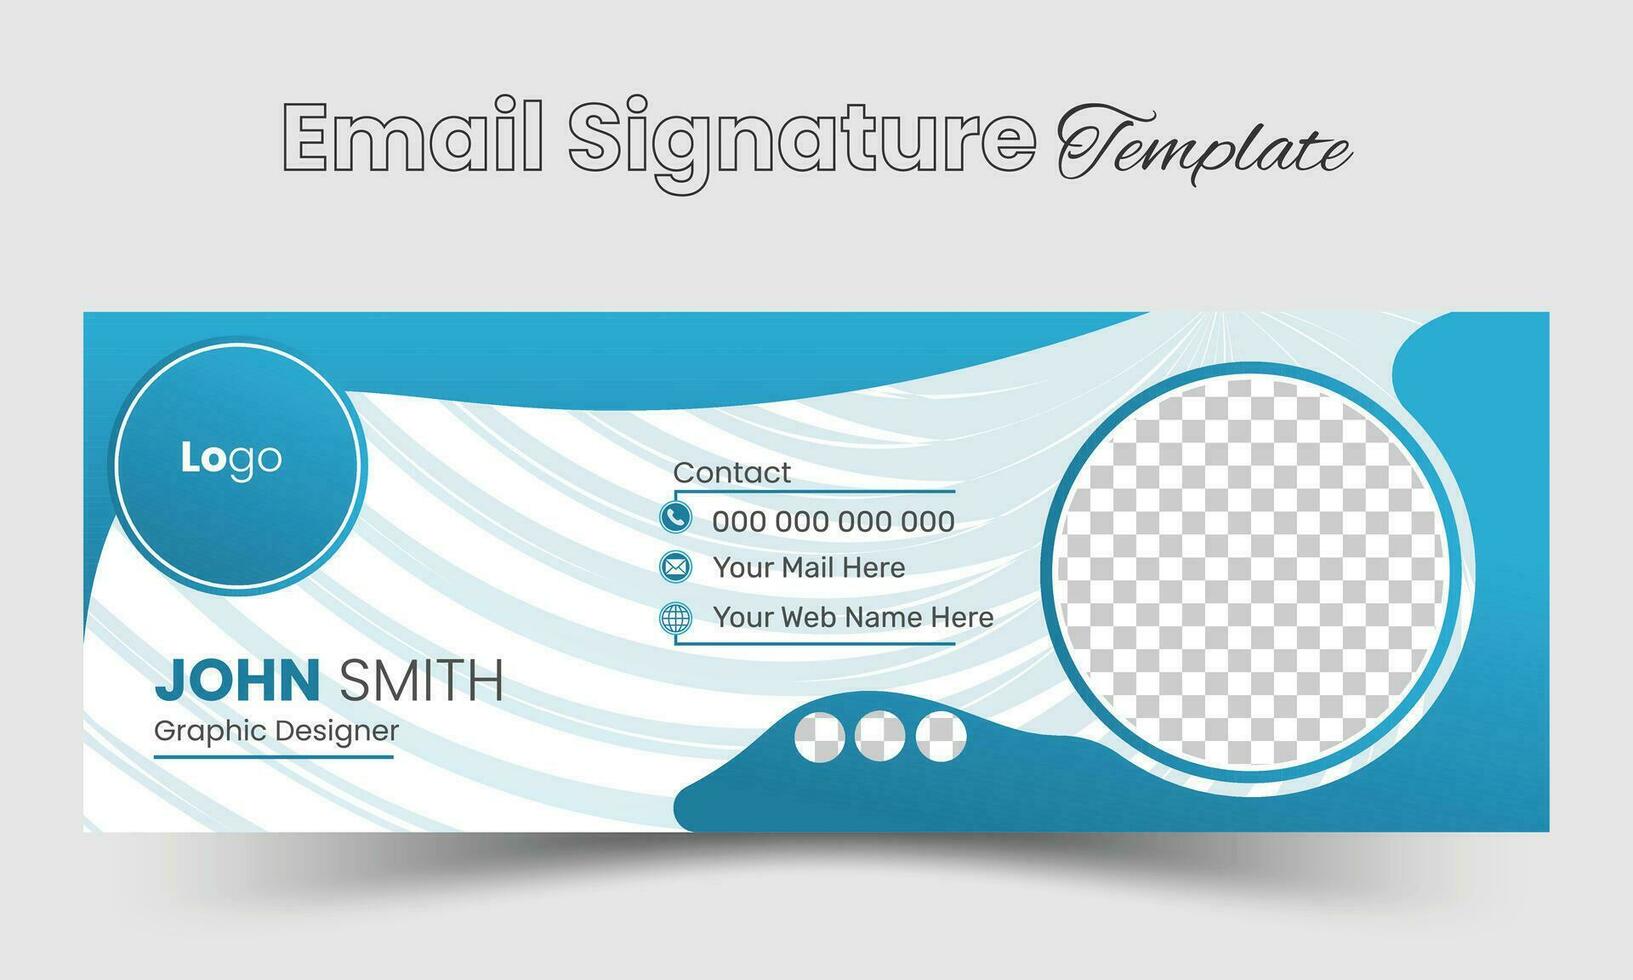 Email Signature Template Design Free Vector